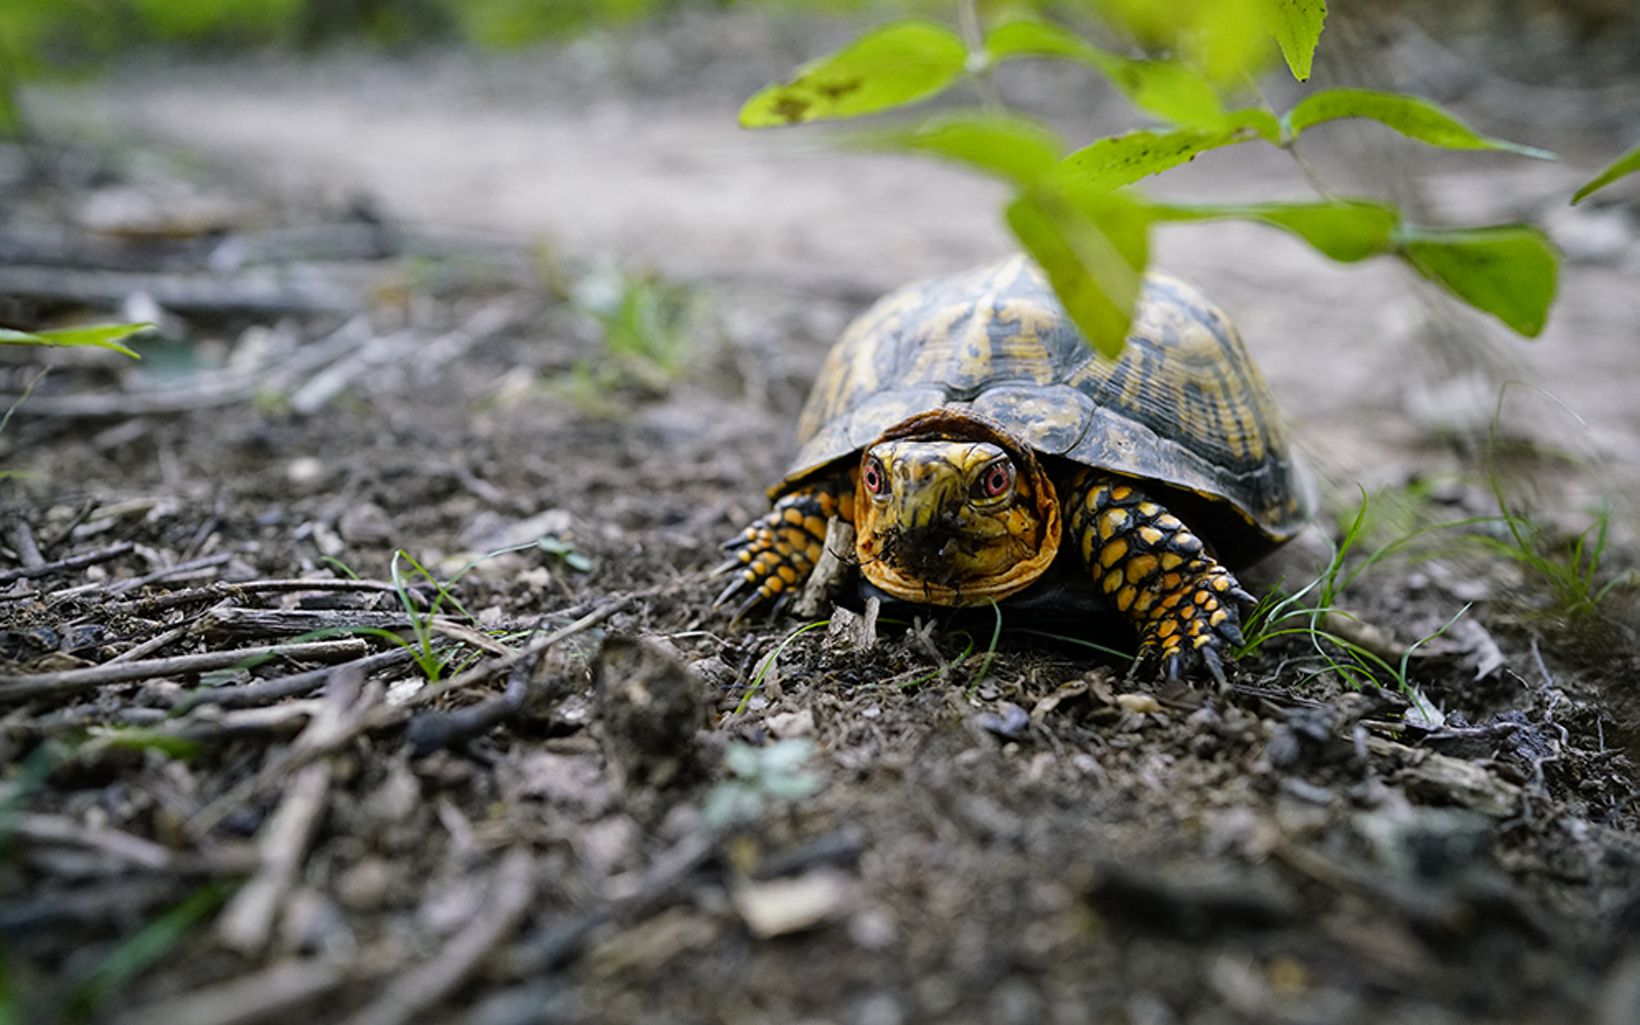 Eastern Box Turtle This turtle gets its name from its ability to completely enclose its body inside its shell. The shell can close up like a box and protect the turtle.  © TJ Vissing